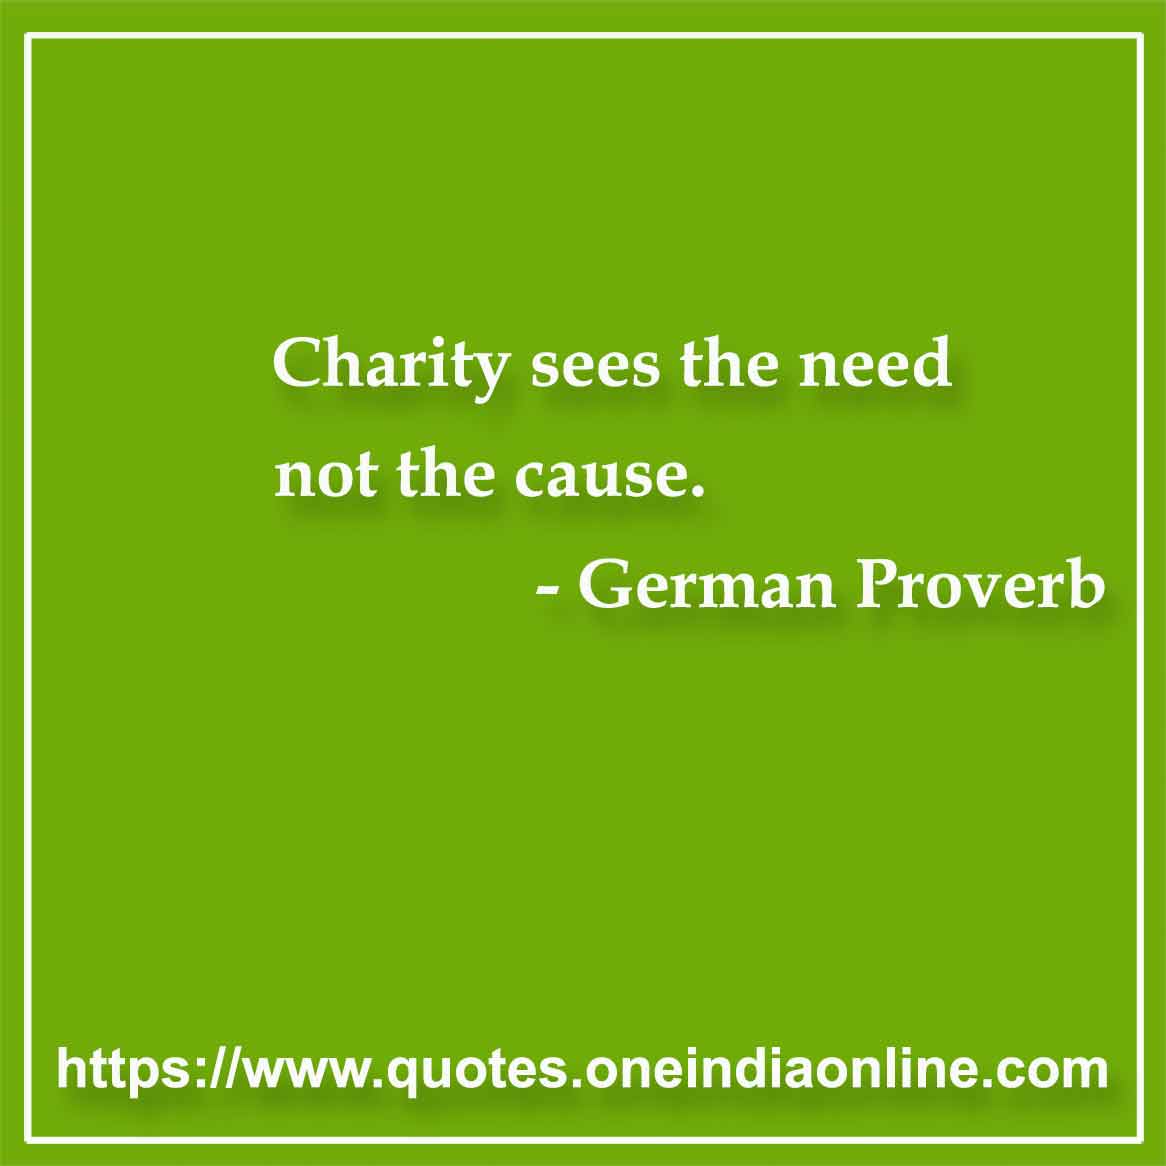 Charity sees the need, not the cause.

- Proverb